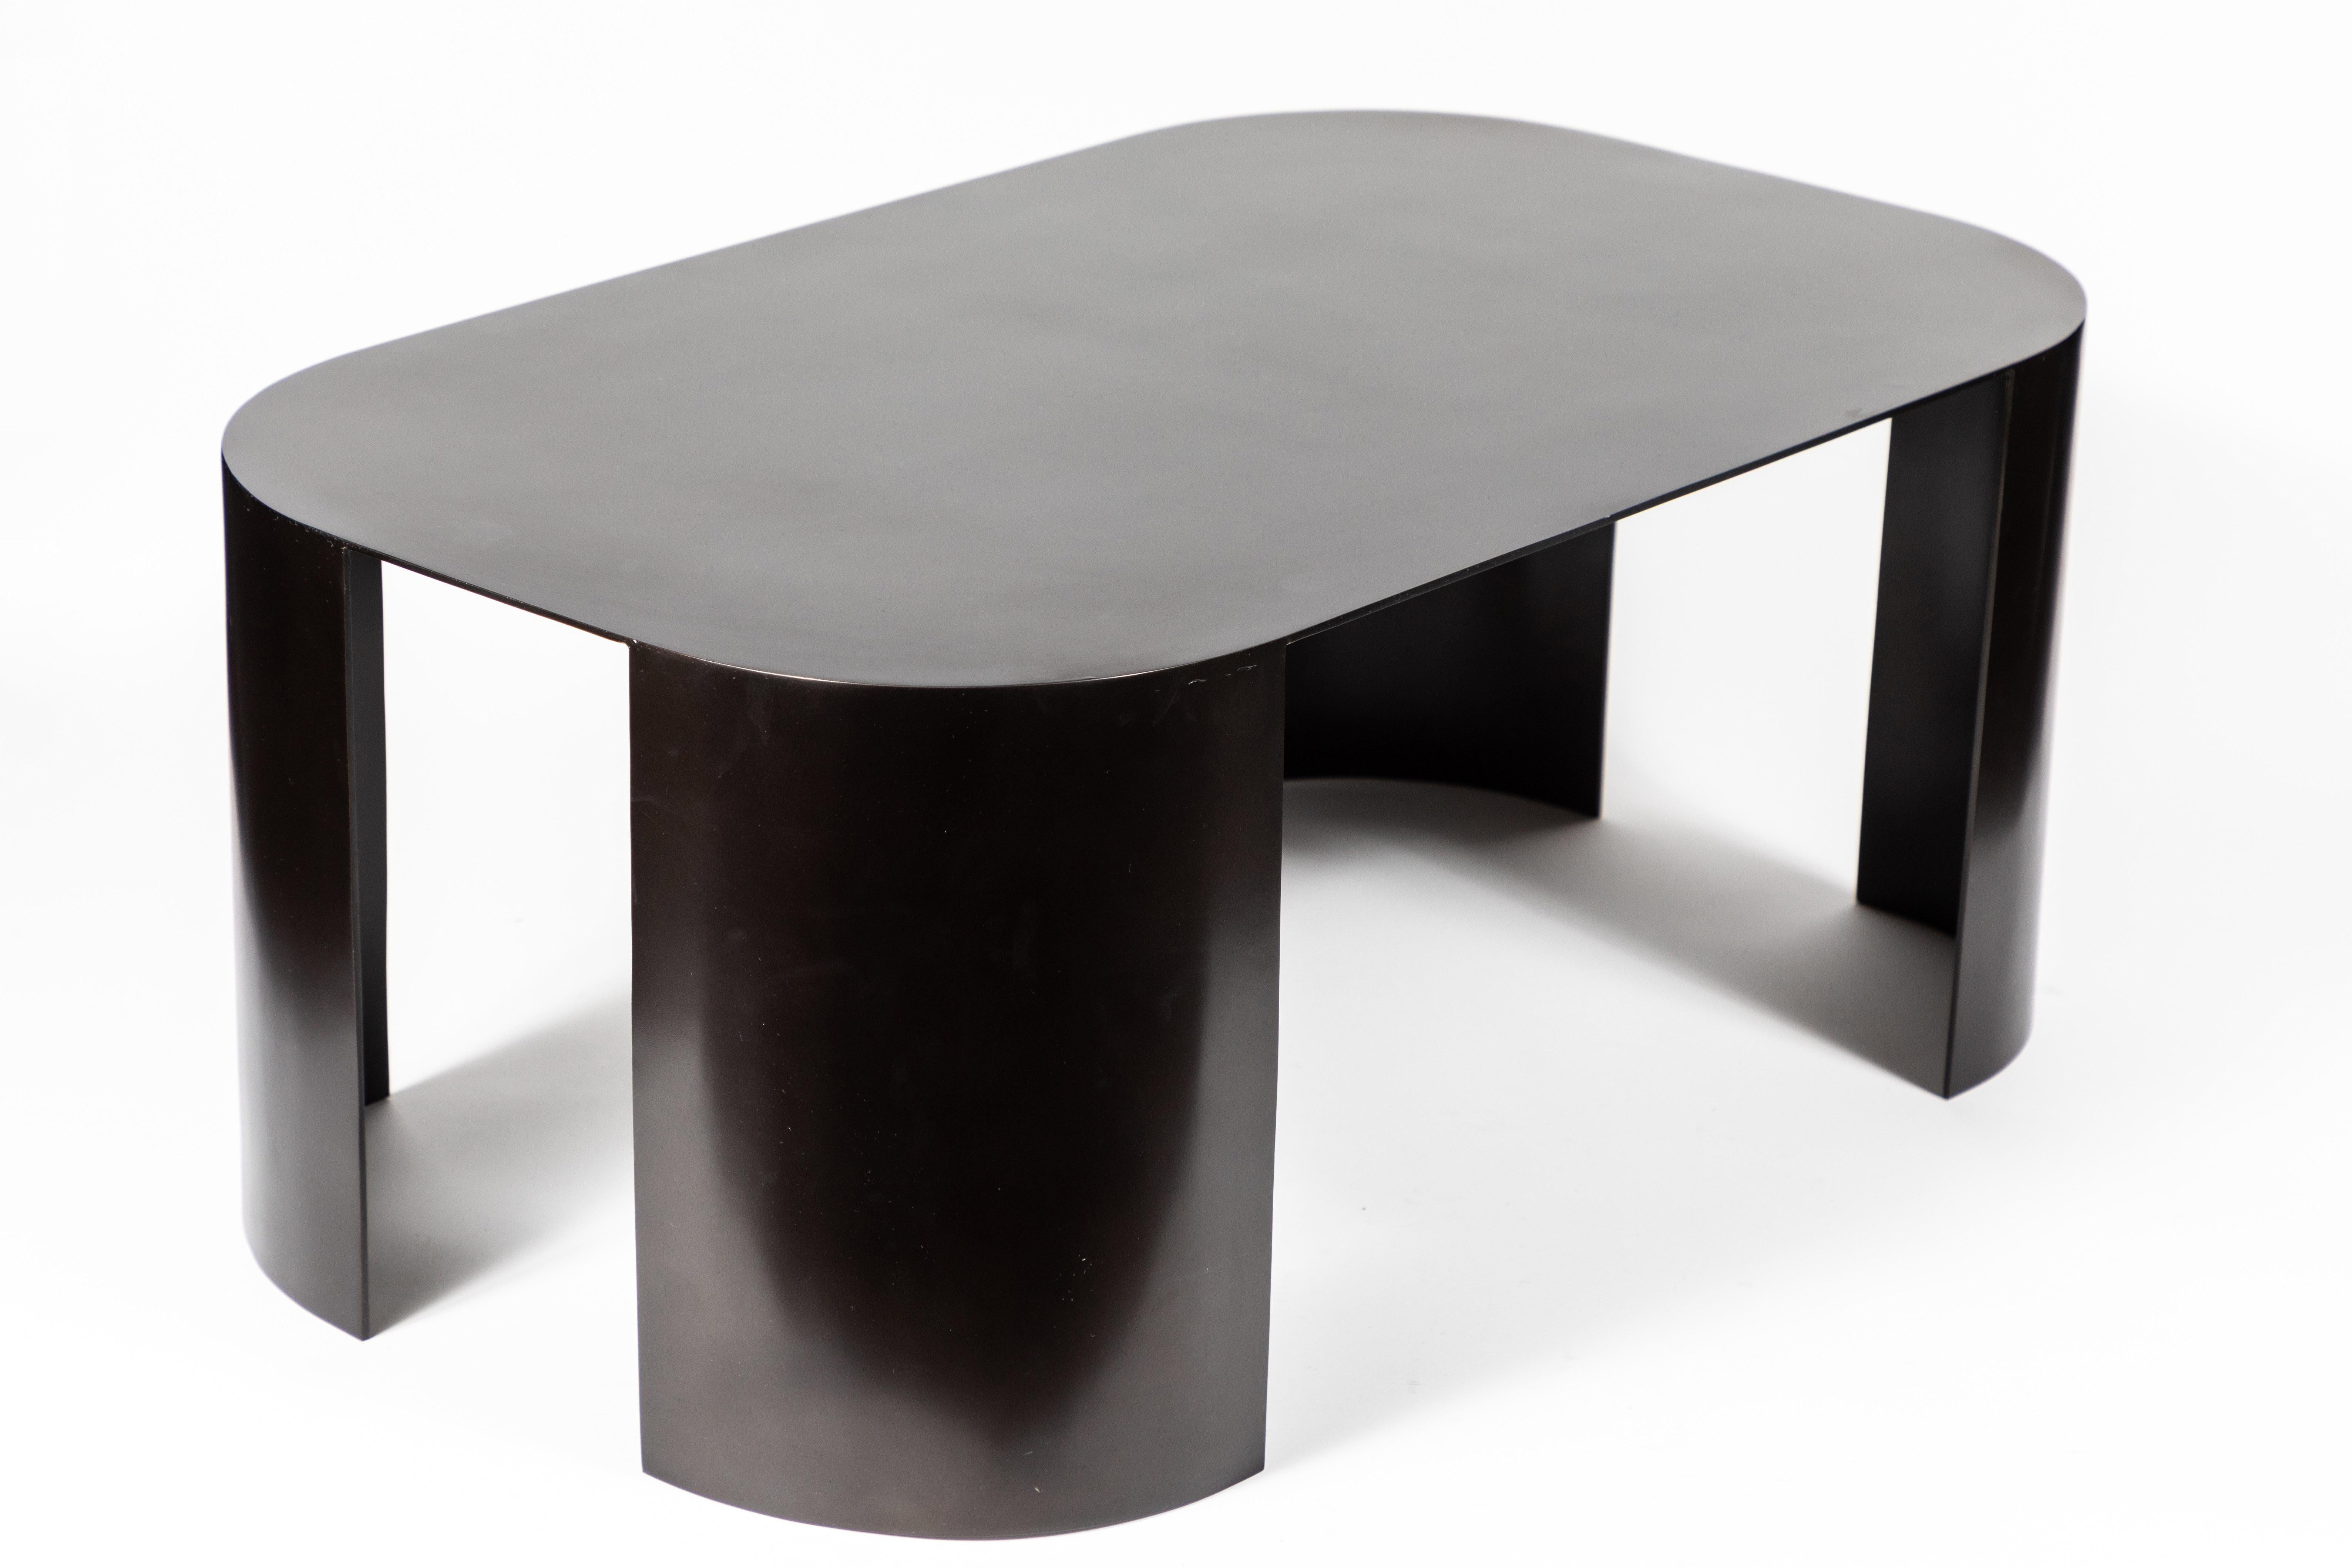 Beautiful coffee table in bronze-plated steel in the manner of Karl Springer. The table's clean lines and size make it a versatile piece in many spaces.